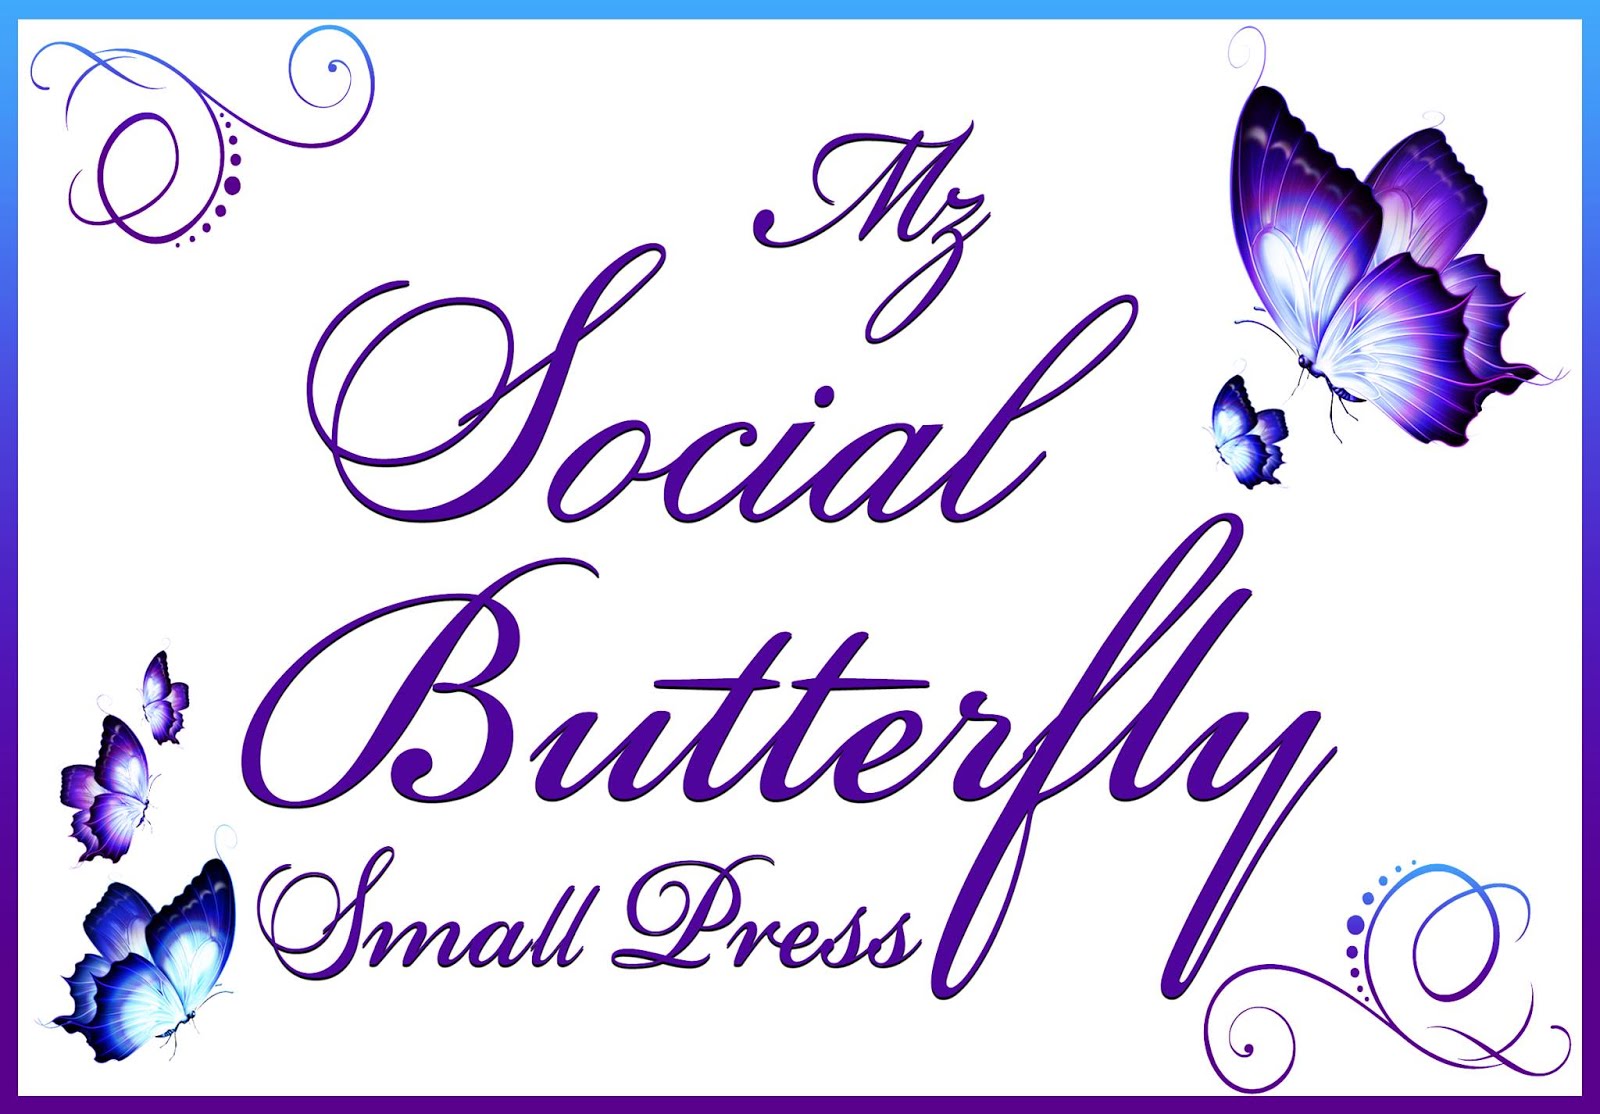 Mz Social Butterfly Network Small Press